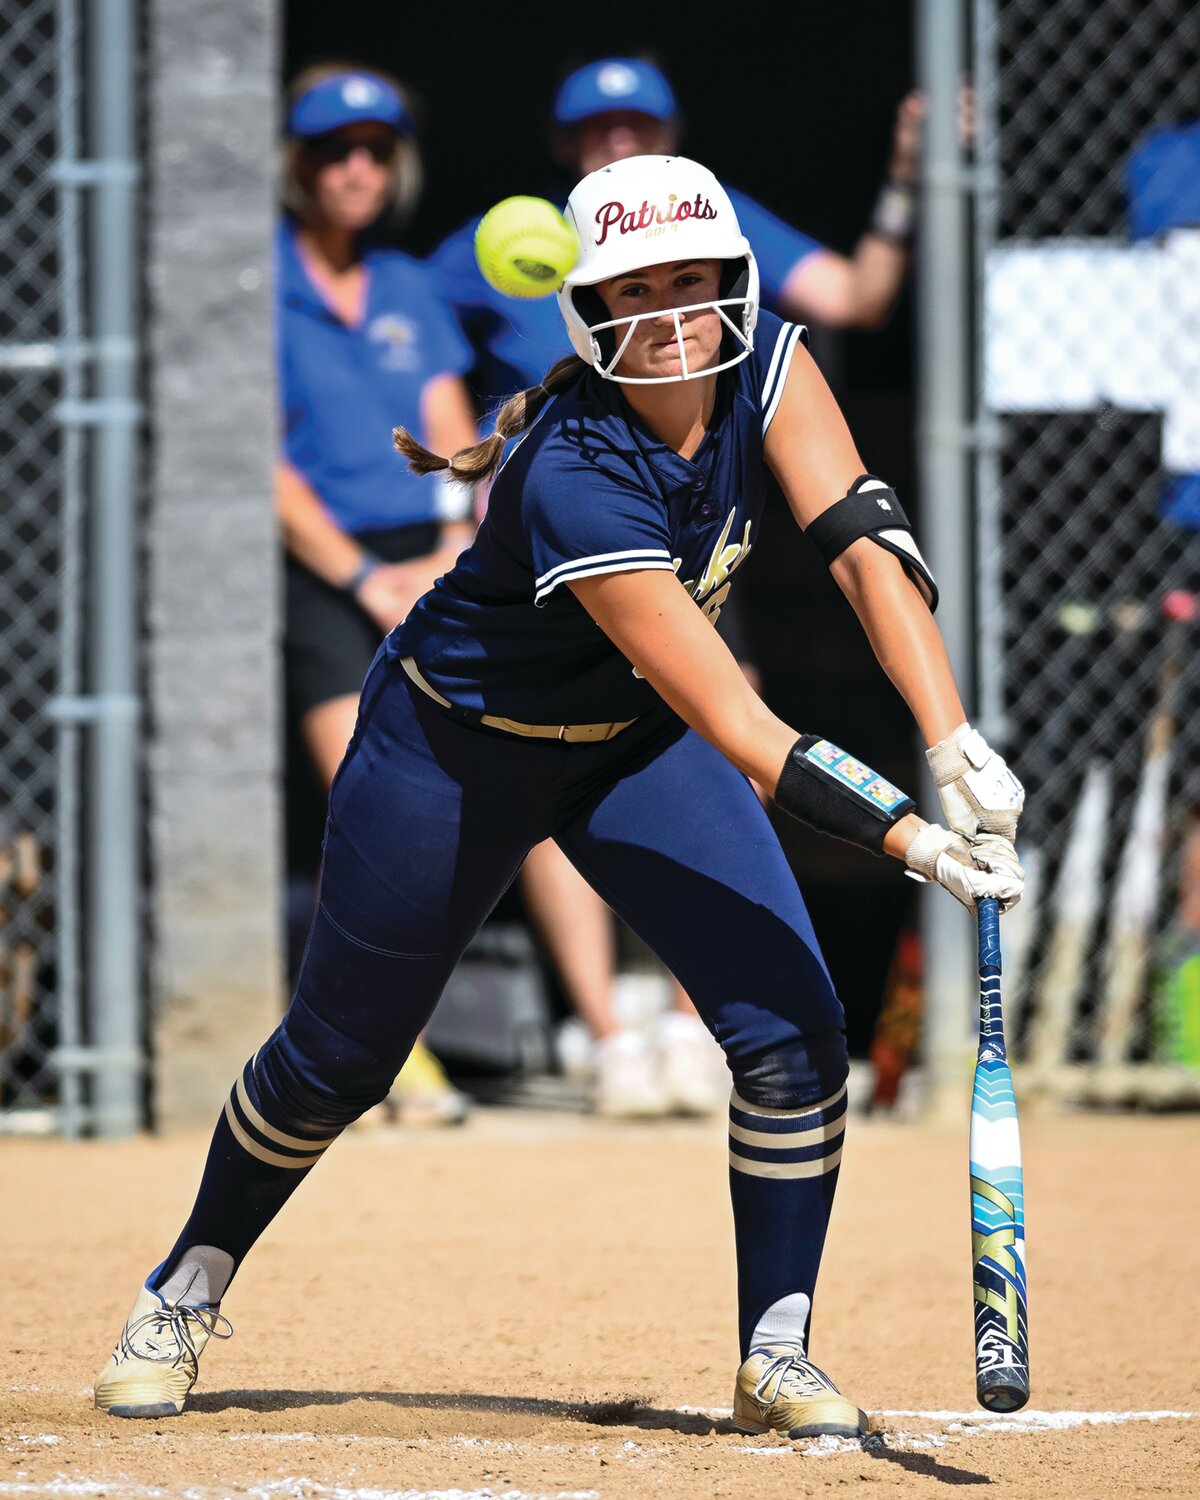 Council Rock South’s Julia Scannapieco lunges for an outside pitch during a second-inning at-bat.